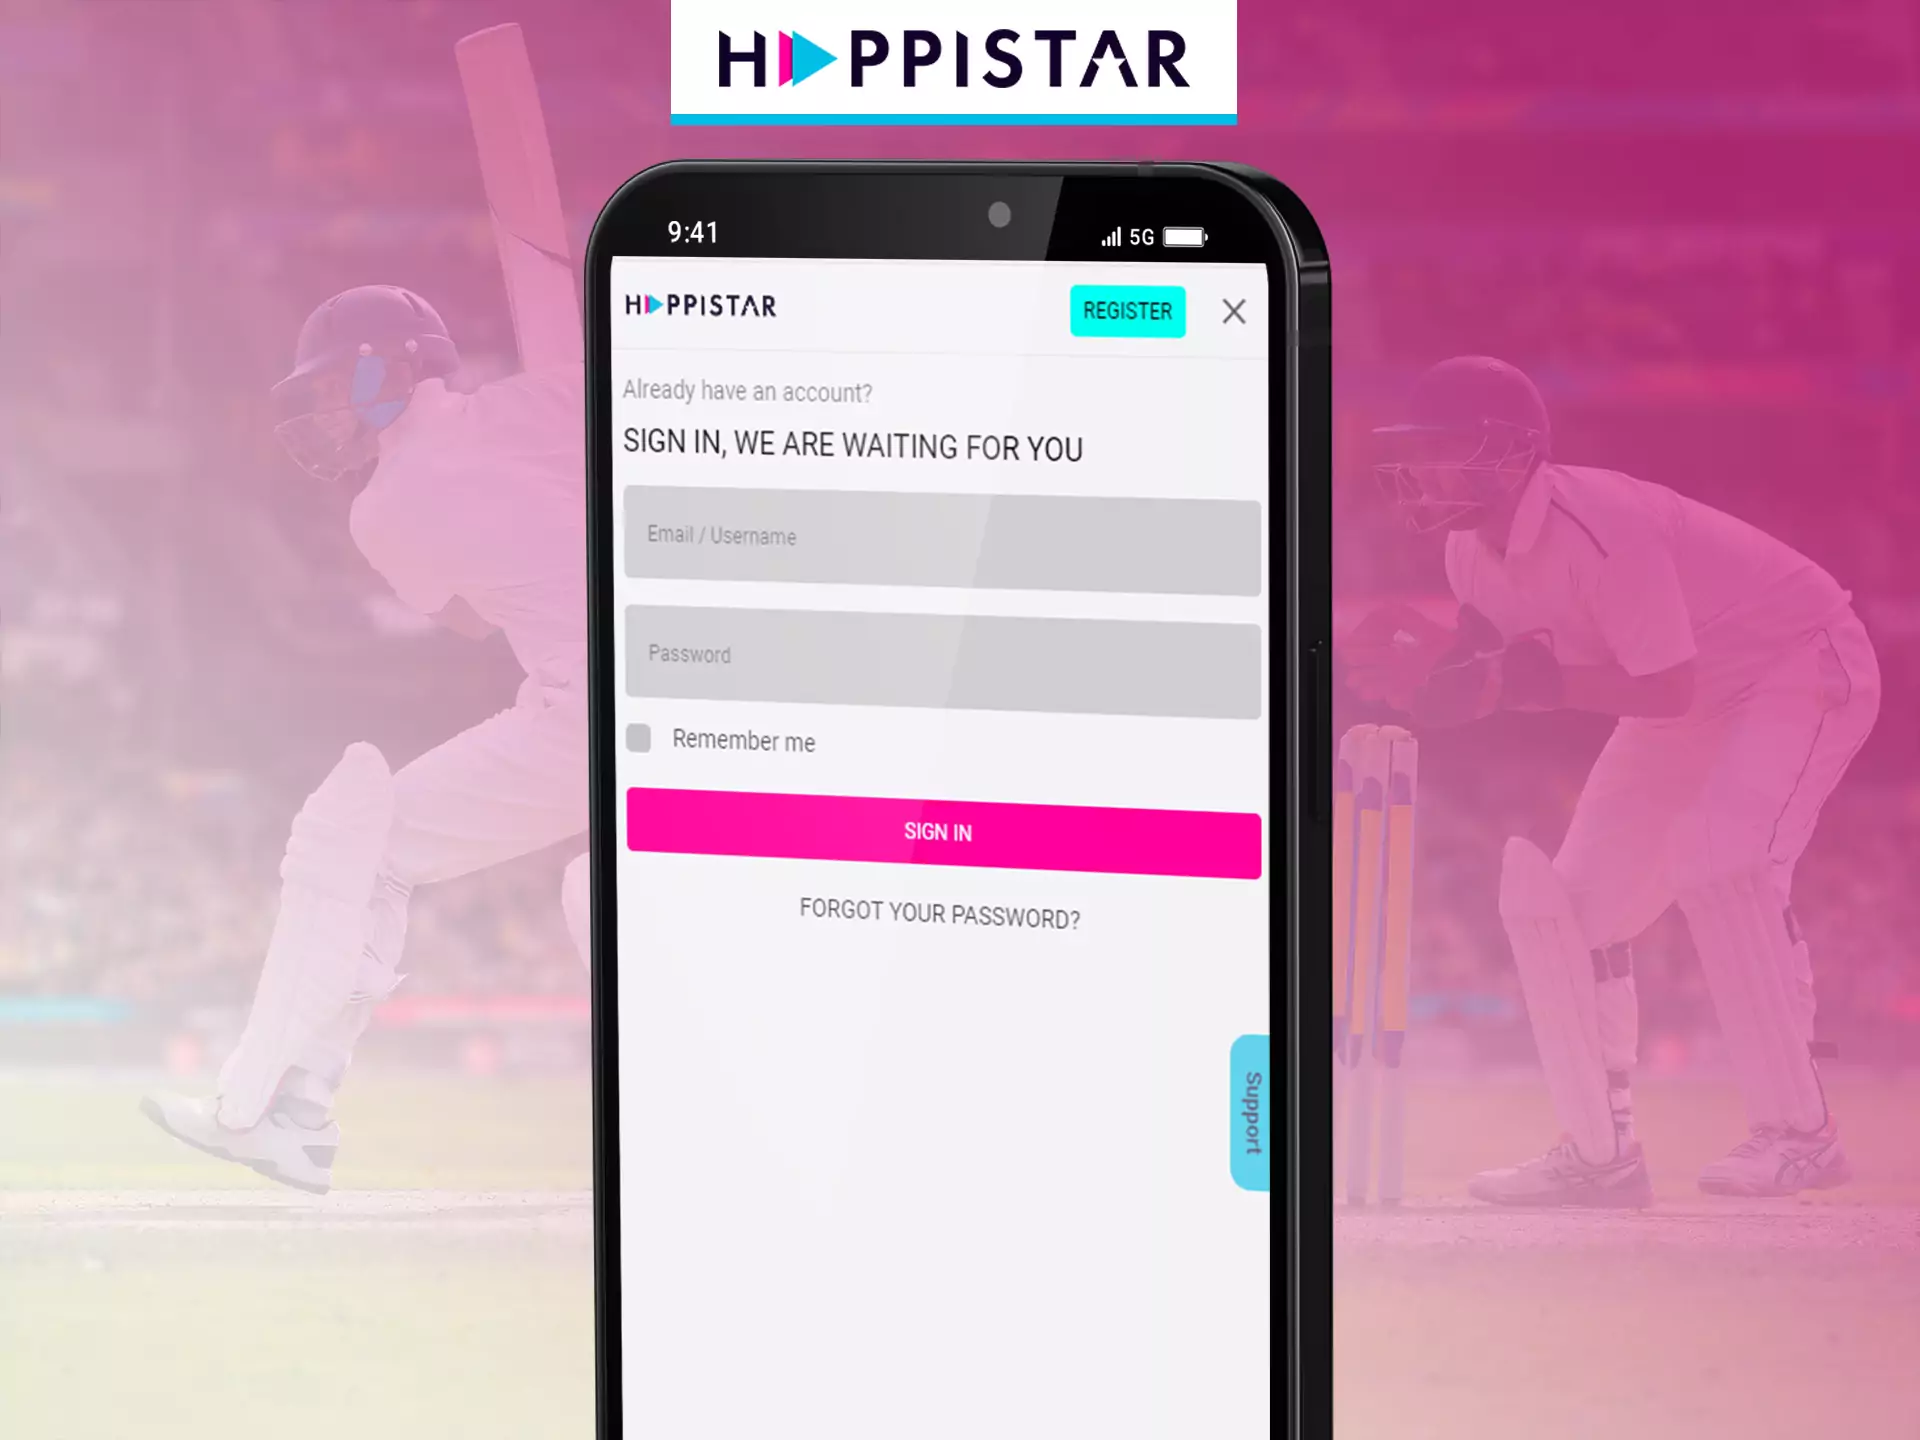 To start using Happistar, you need to log in.